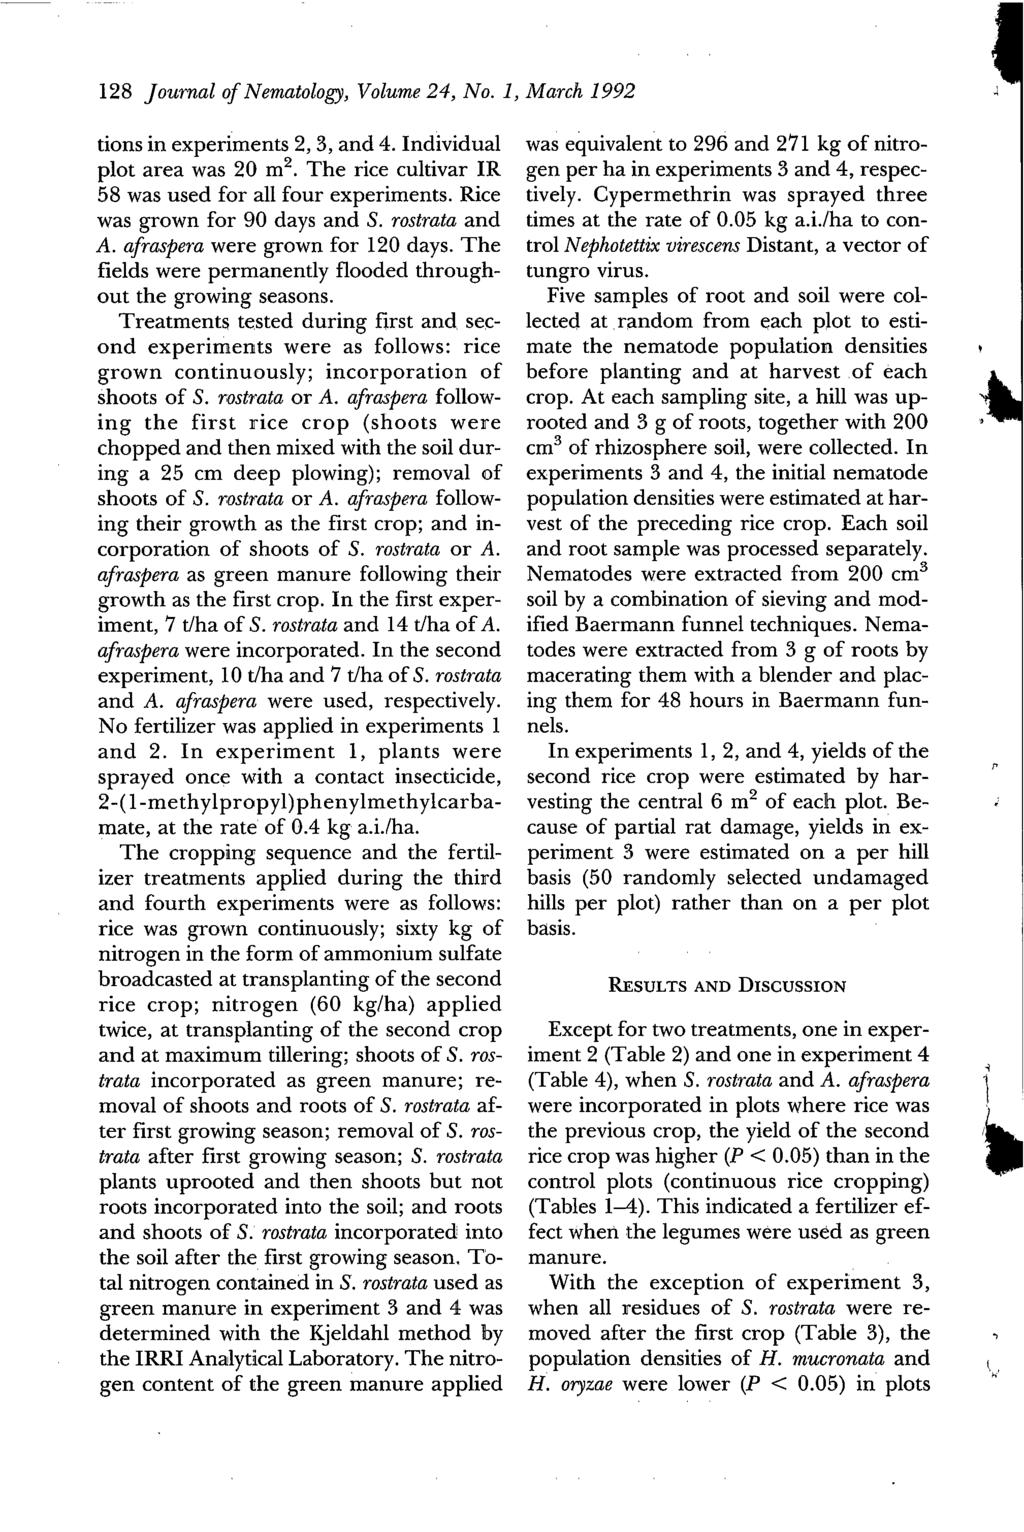 128 Journal of Nematology, Volume 24, No. 1, March 1992 tions in experiments 2,3, and 4. Individual plot area was 20 m2. The rice cultivar IR 58 was used for all four experiments.